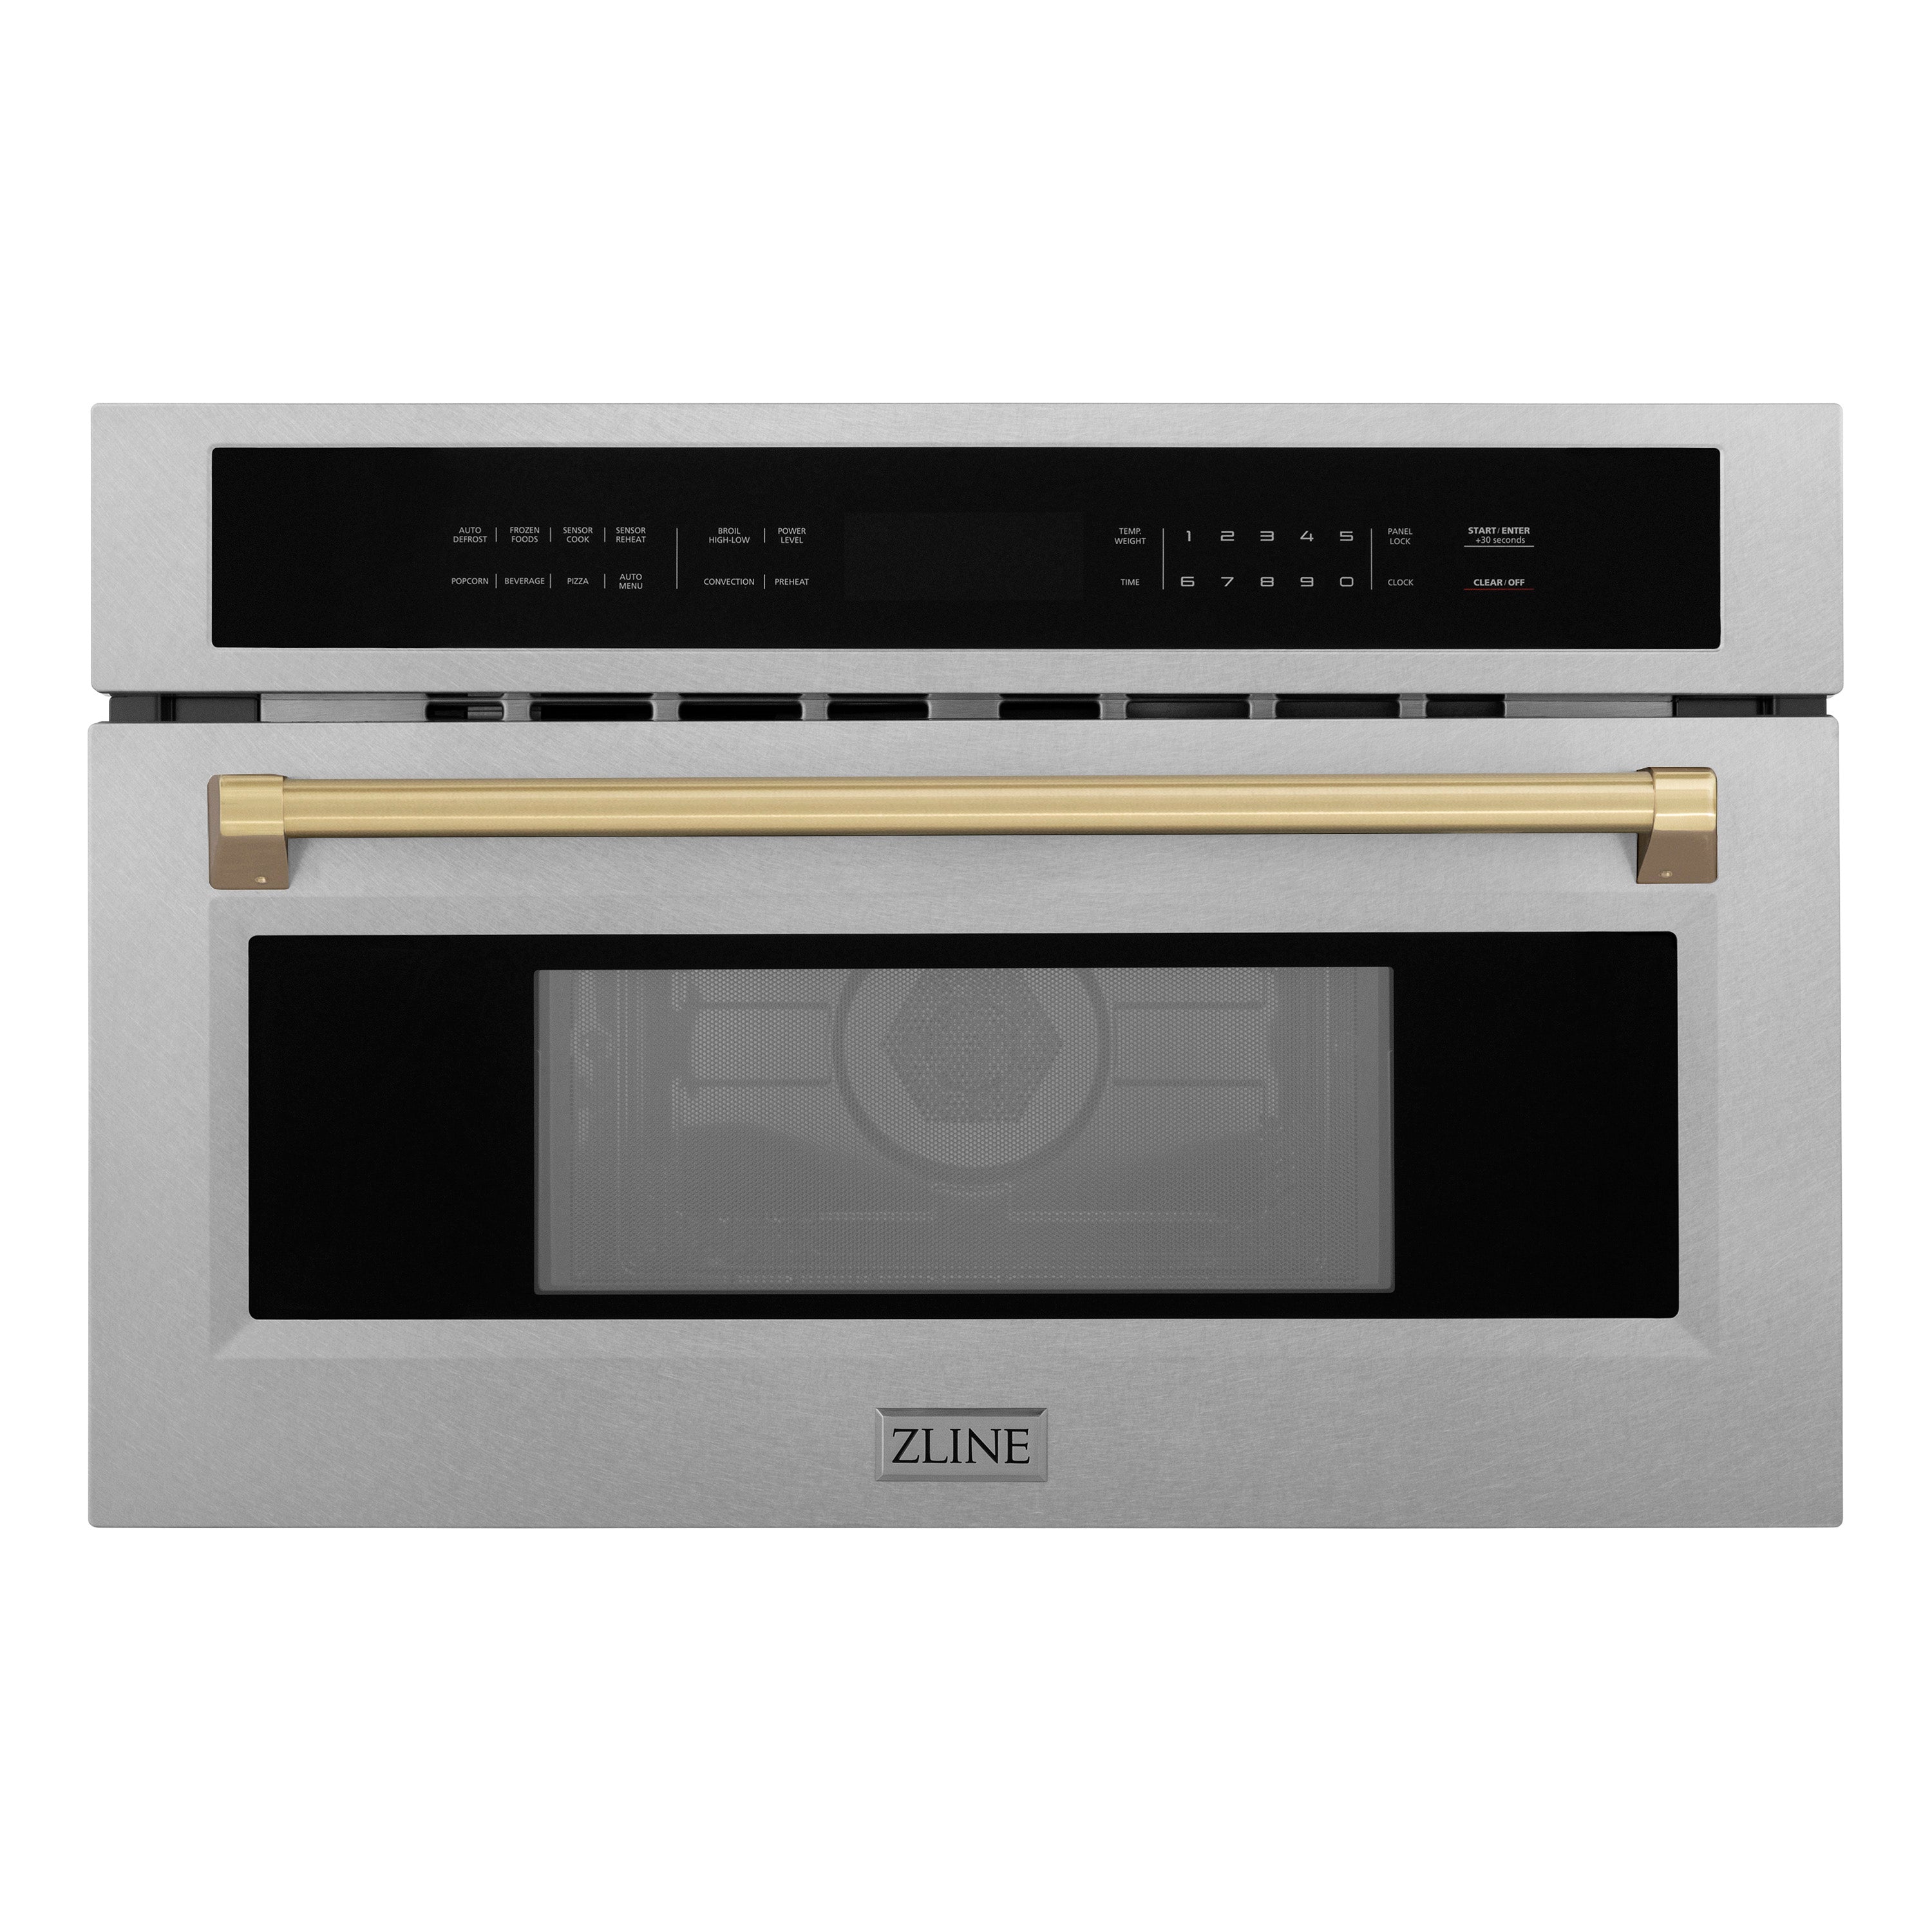 ZLINE Autograph Edition 30‚Äù 1.6 cu ft. Built-in Convection Microwave Oven in Fingerprint Resistant Stainless Steel and Champagne Bronze Accents (MWOZ-30-SS-CB)